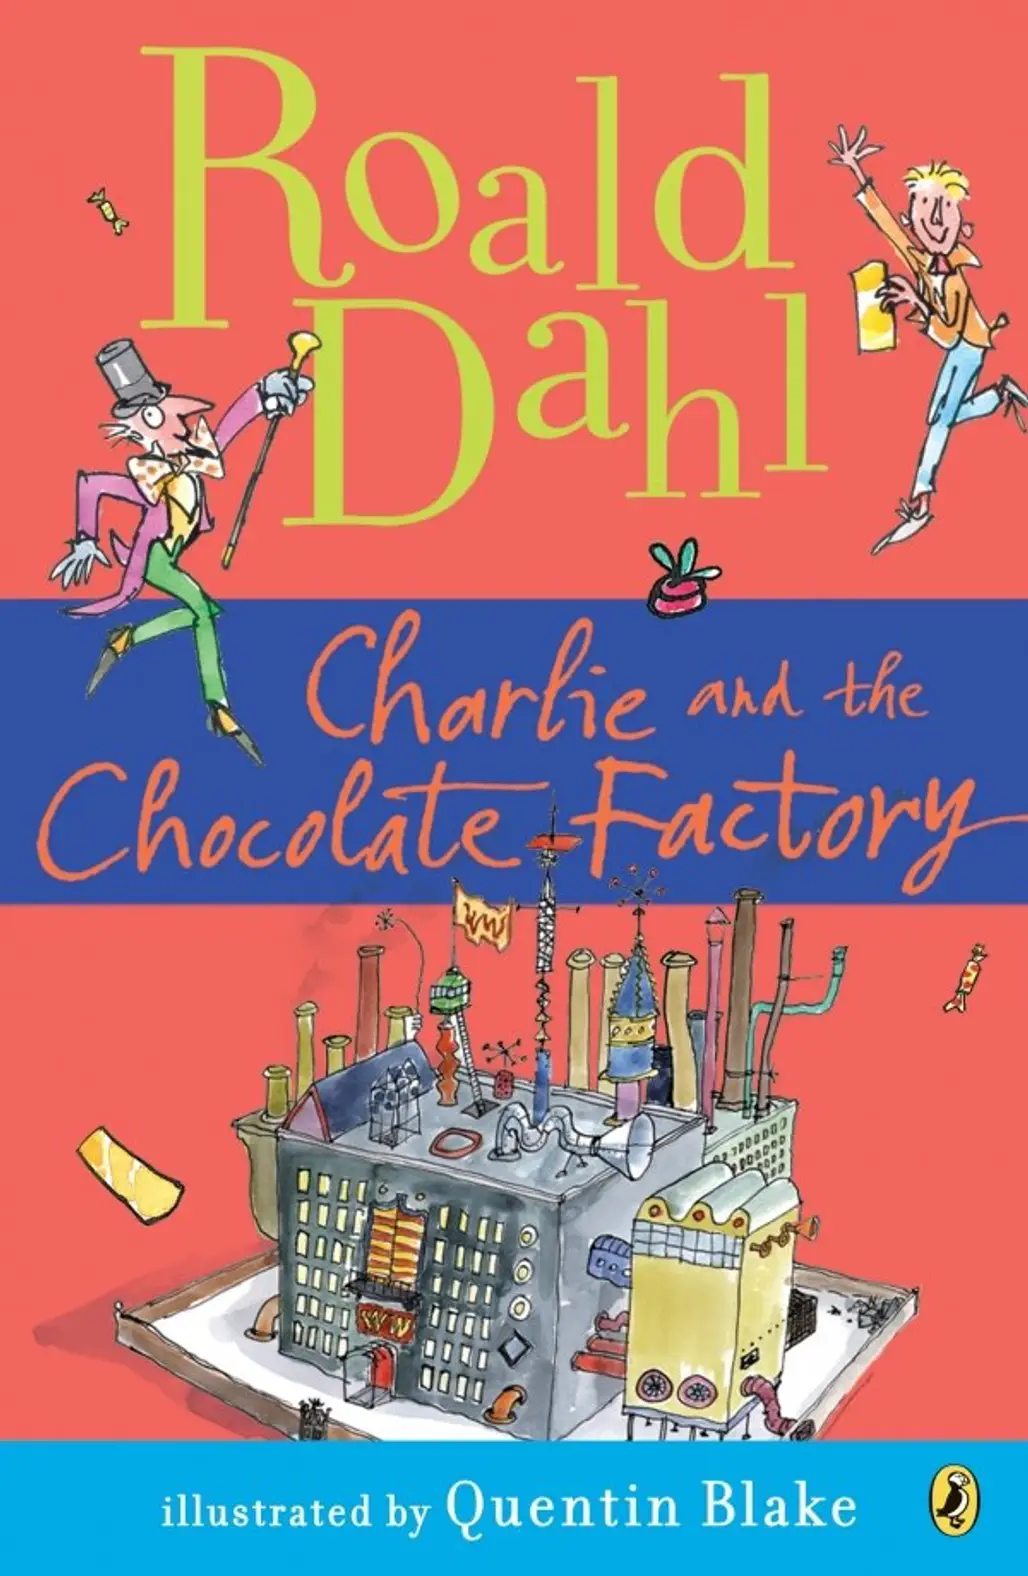 Charlie and the Chocolate Factory – Roald Dahl